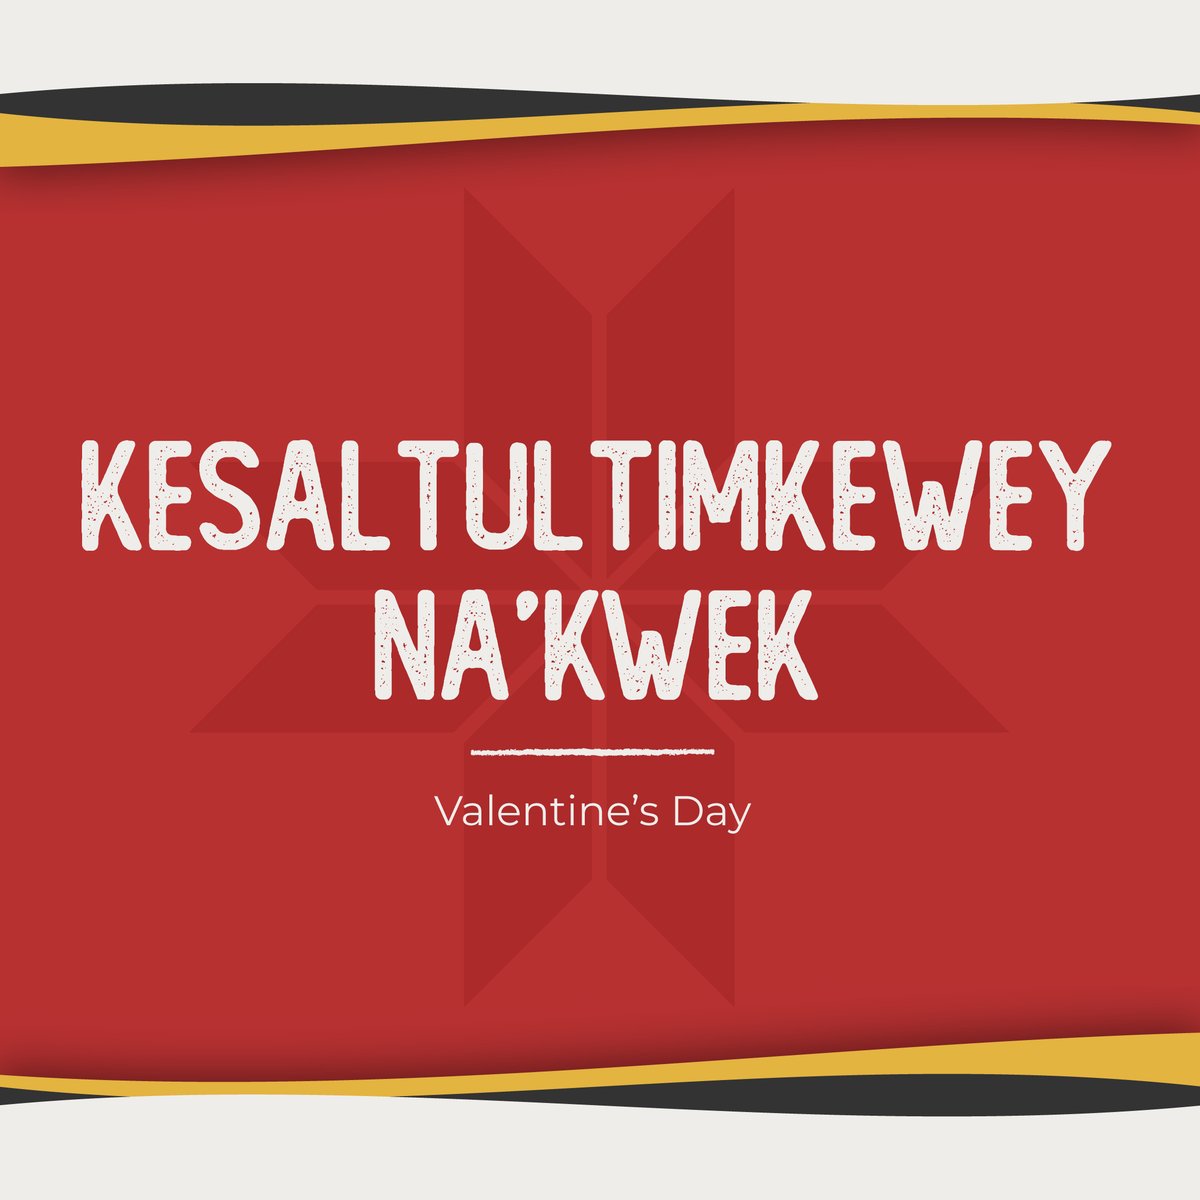 Looking for a Mi'kmaw-inspired valentine? ❤️

Send this to your someone special! 💌

#ExperienceLennoxIsland #LennoxIsland #IndigenousTourism #IndigenousCanada